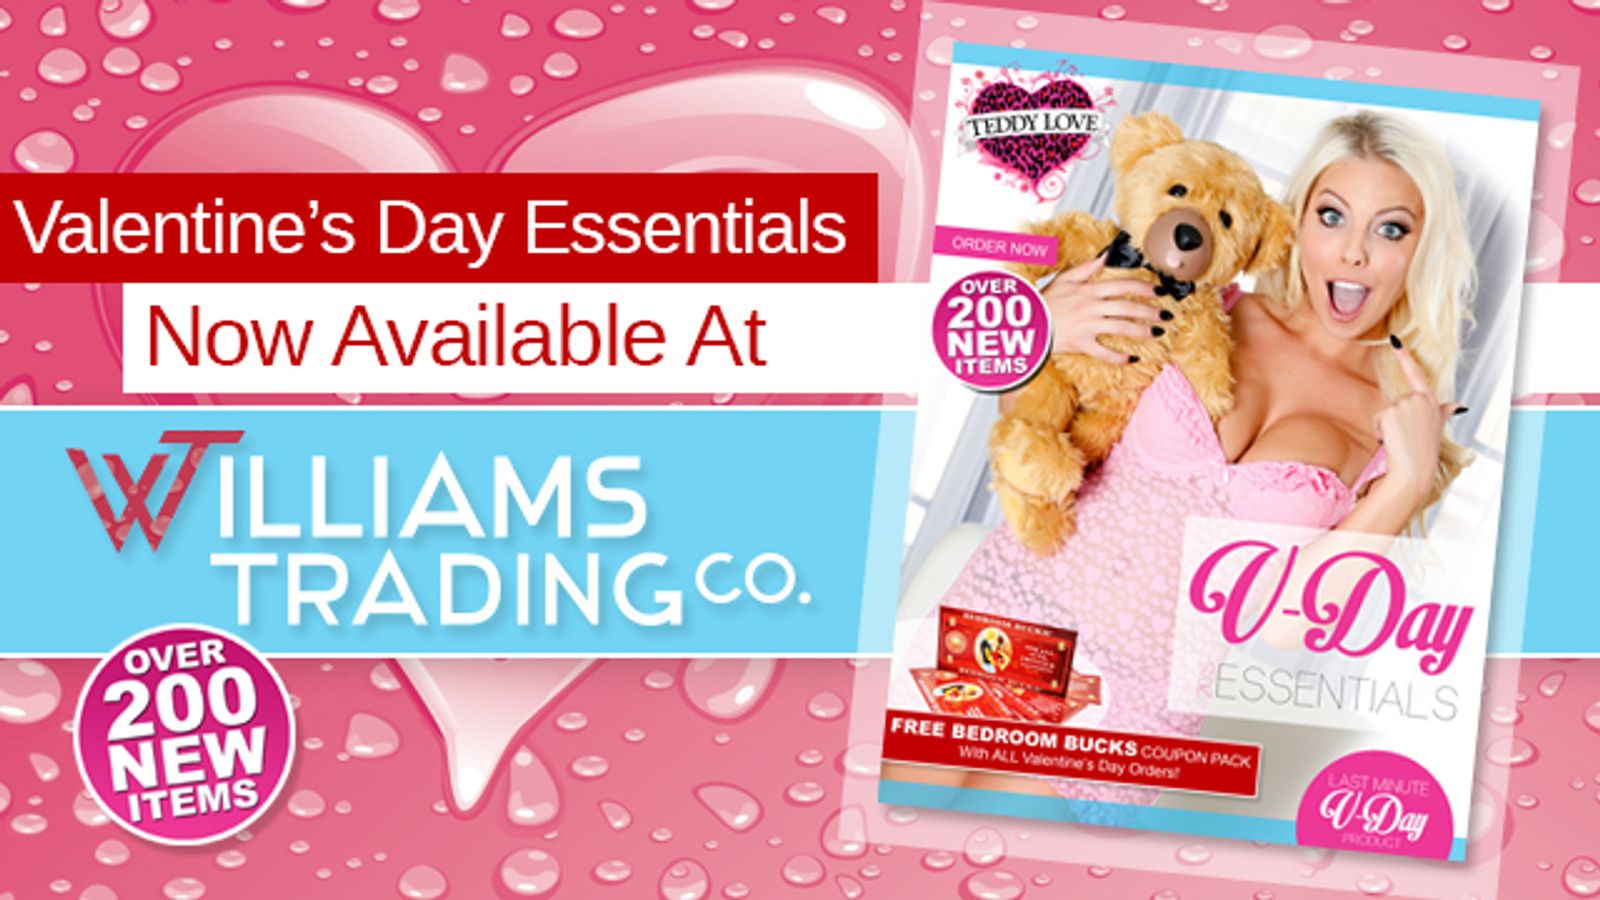 Valentine’s Day Essentials Now Available at Williams Trading